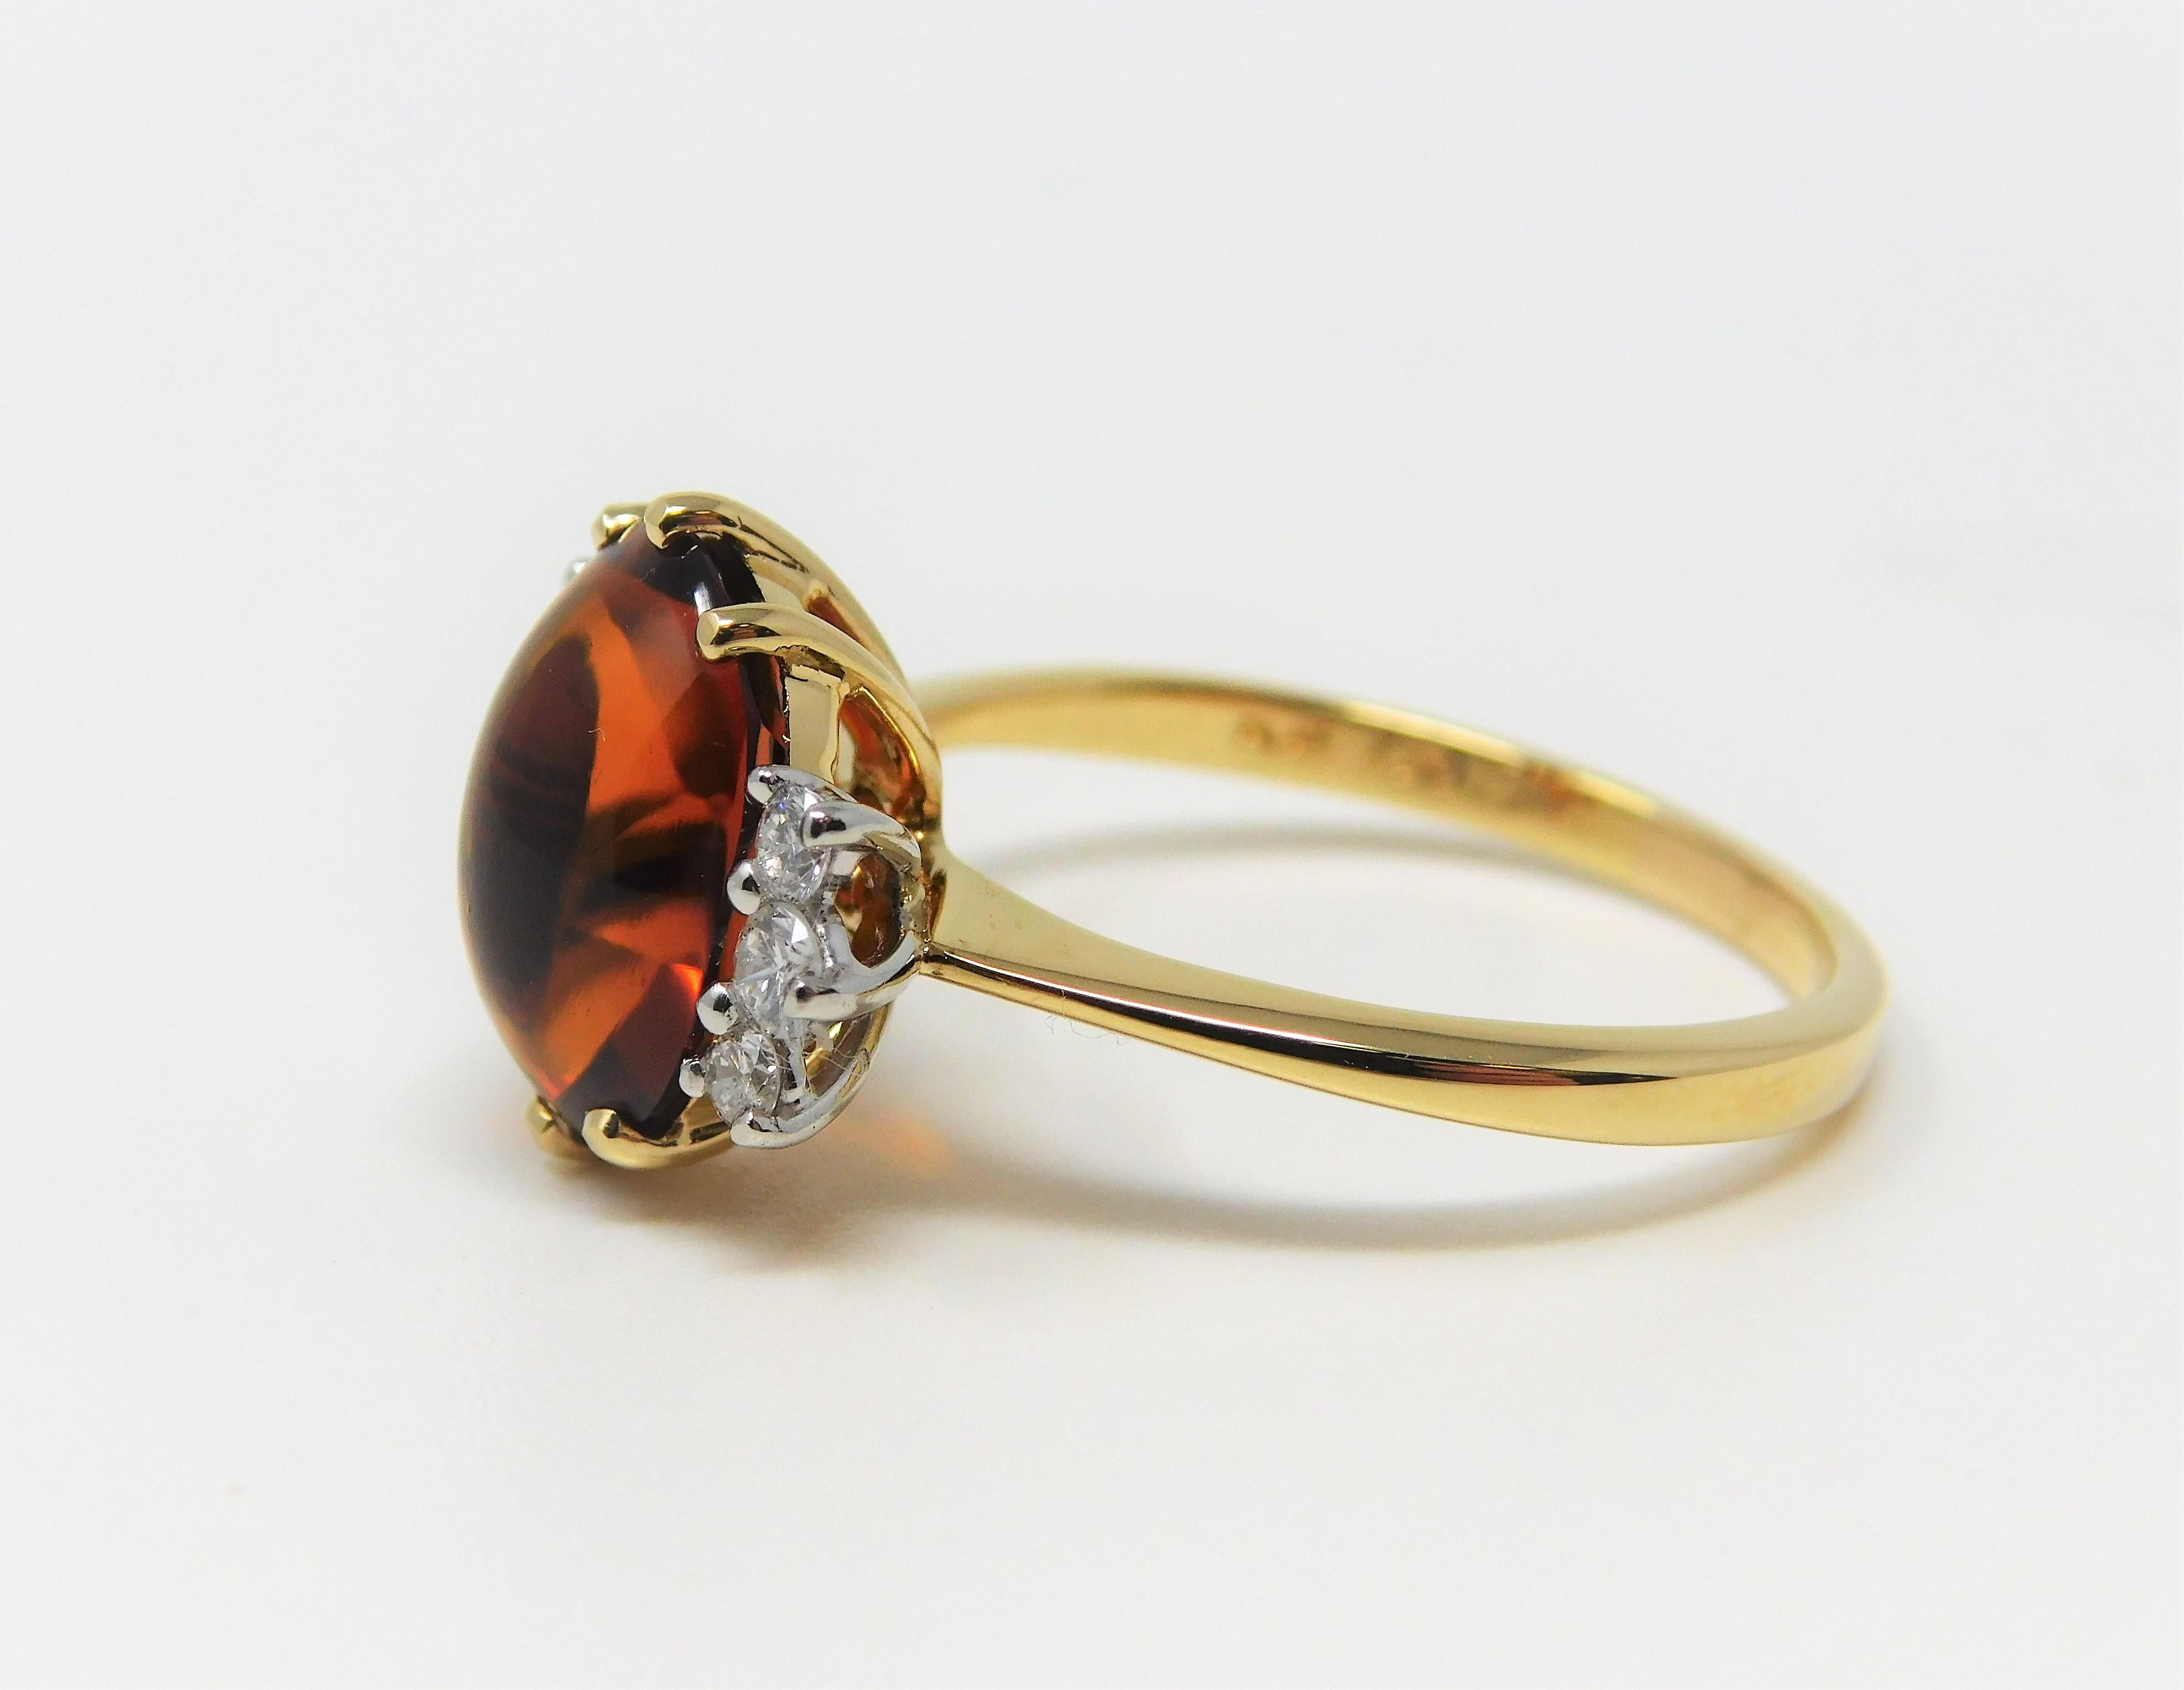 Cabochon Citrine and Diamond Ring in 18 karat yellow gold and platinum.  Size 9.25